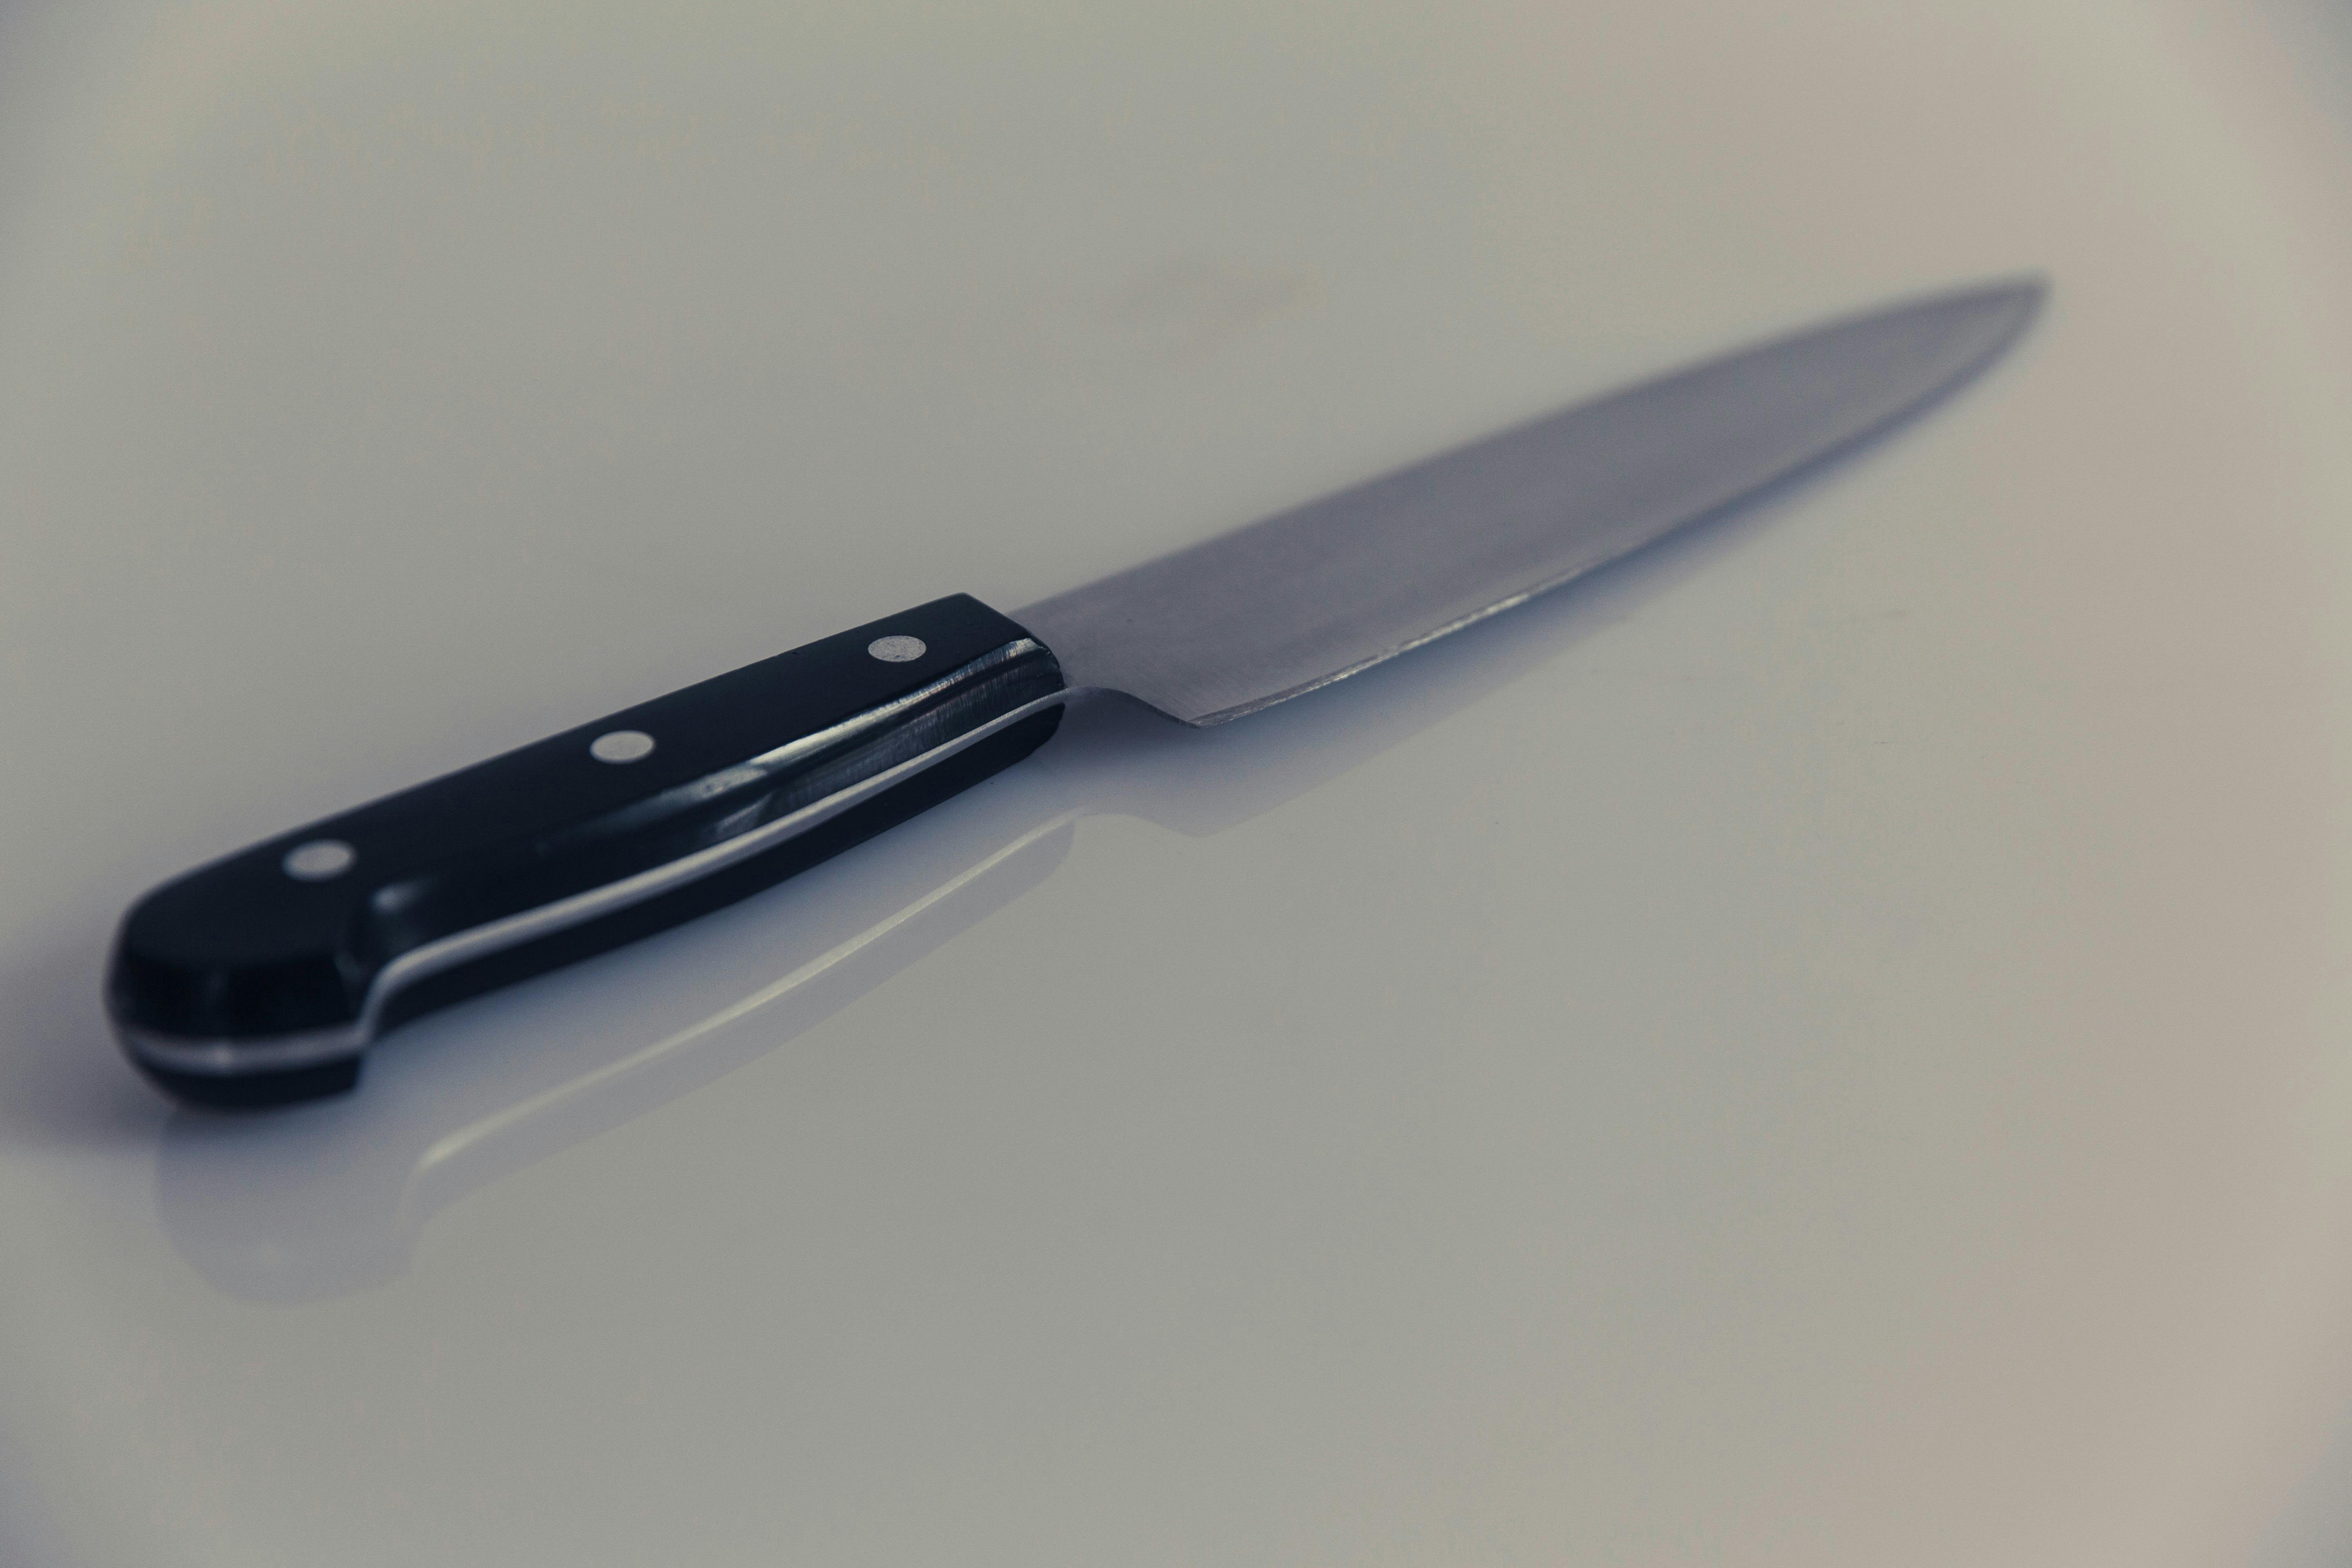 A knife with a visible full tang.